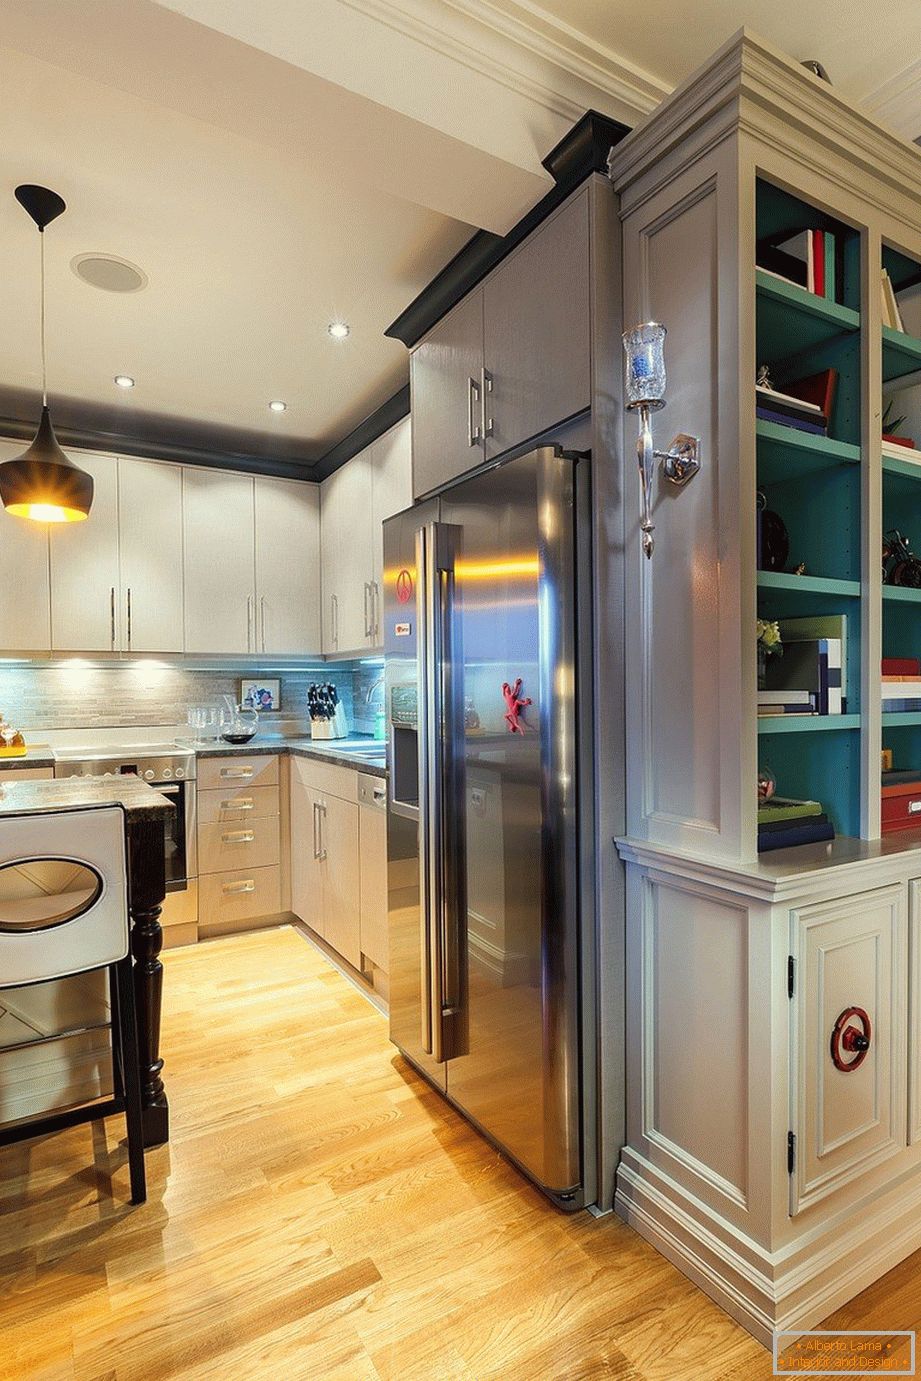 Built-in refrigerator in the kitchen